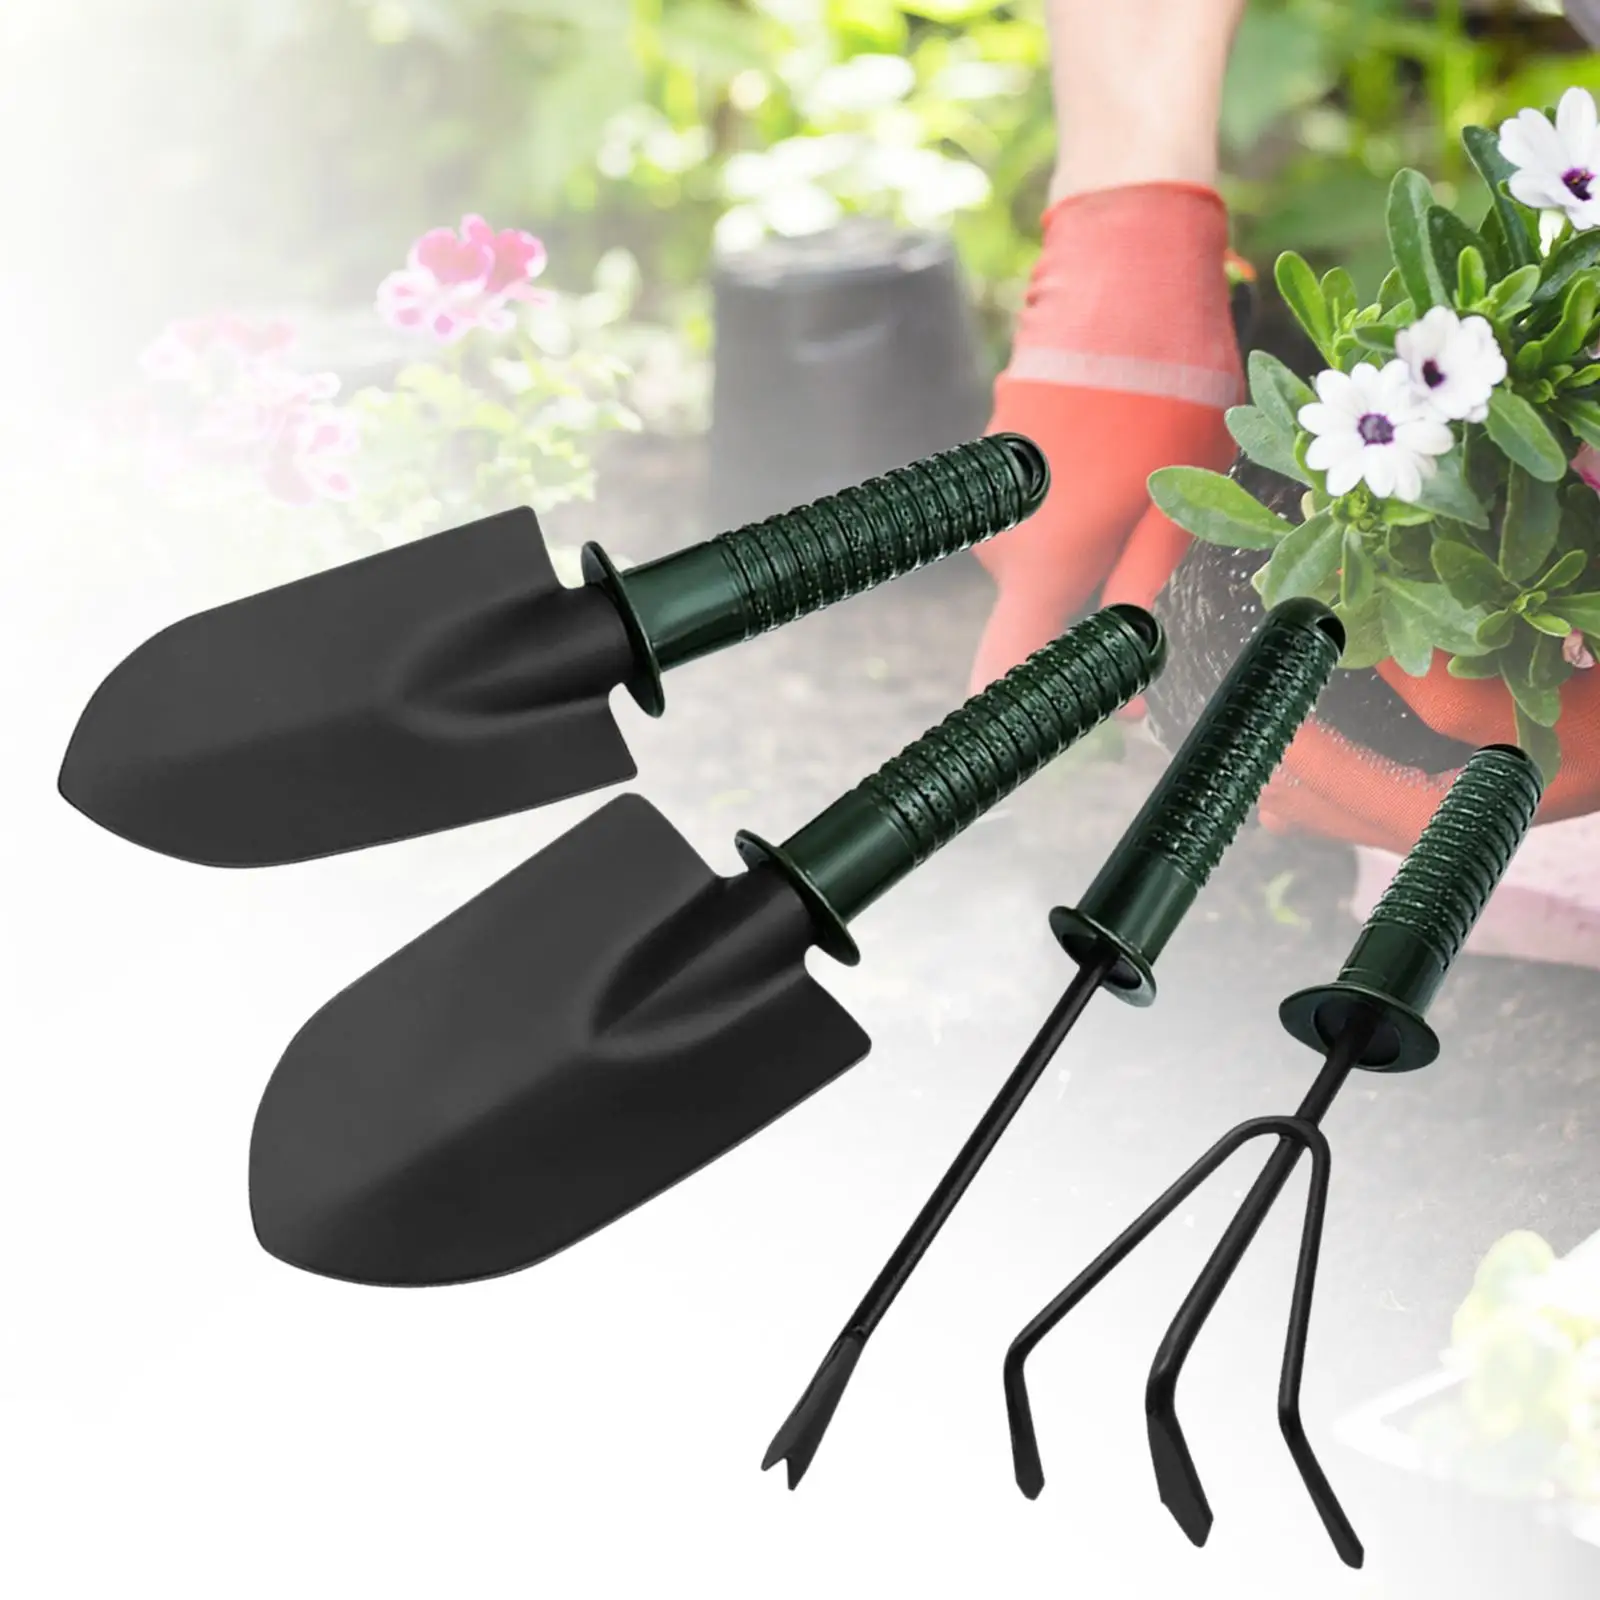 4 Pieces Gardening Tools Planting Tools Vegetables Digging Weeding Garden Accessories for Lawn Yard Bonsai Backyard Mom Gifts